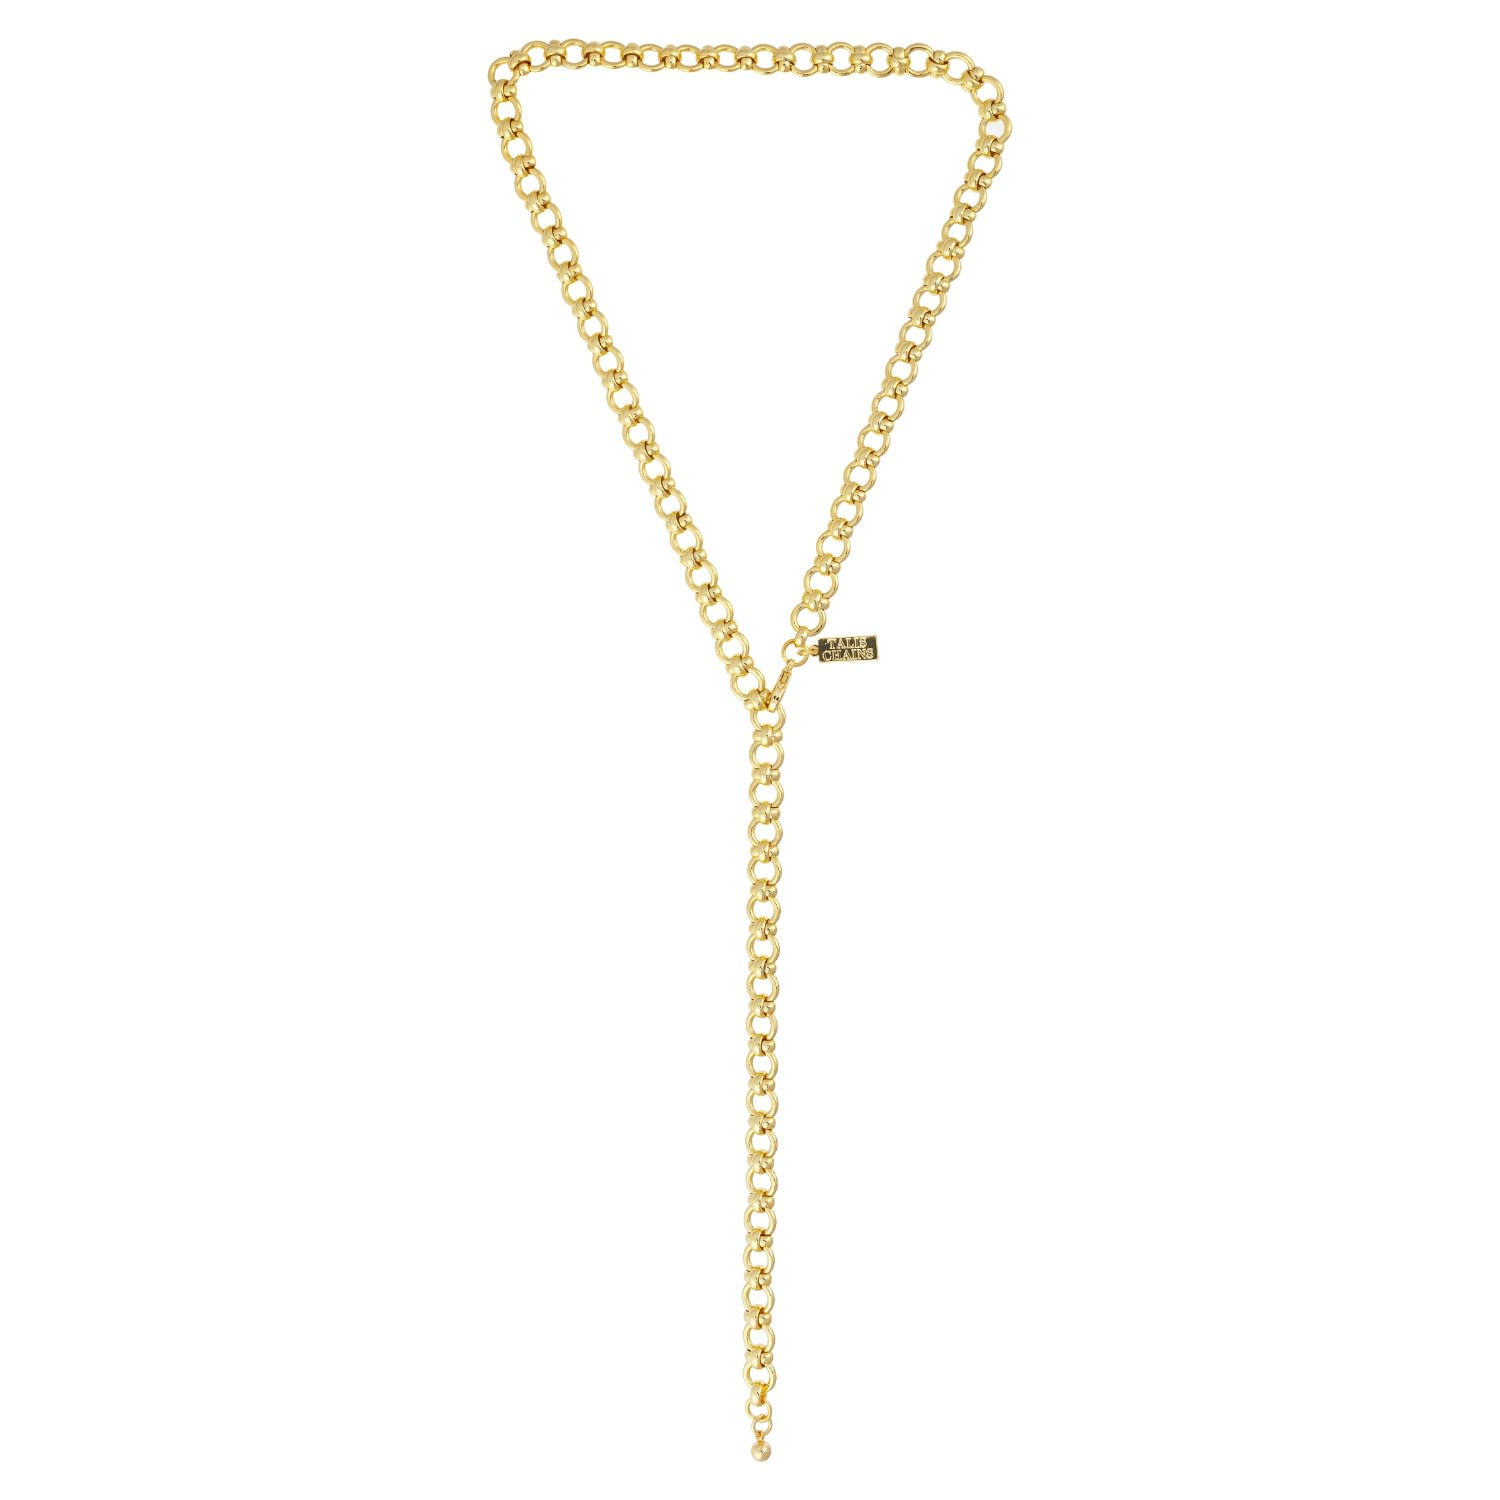 Women's Gold Brooklyn Chain Necklace Talis Chains